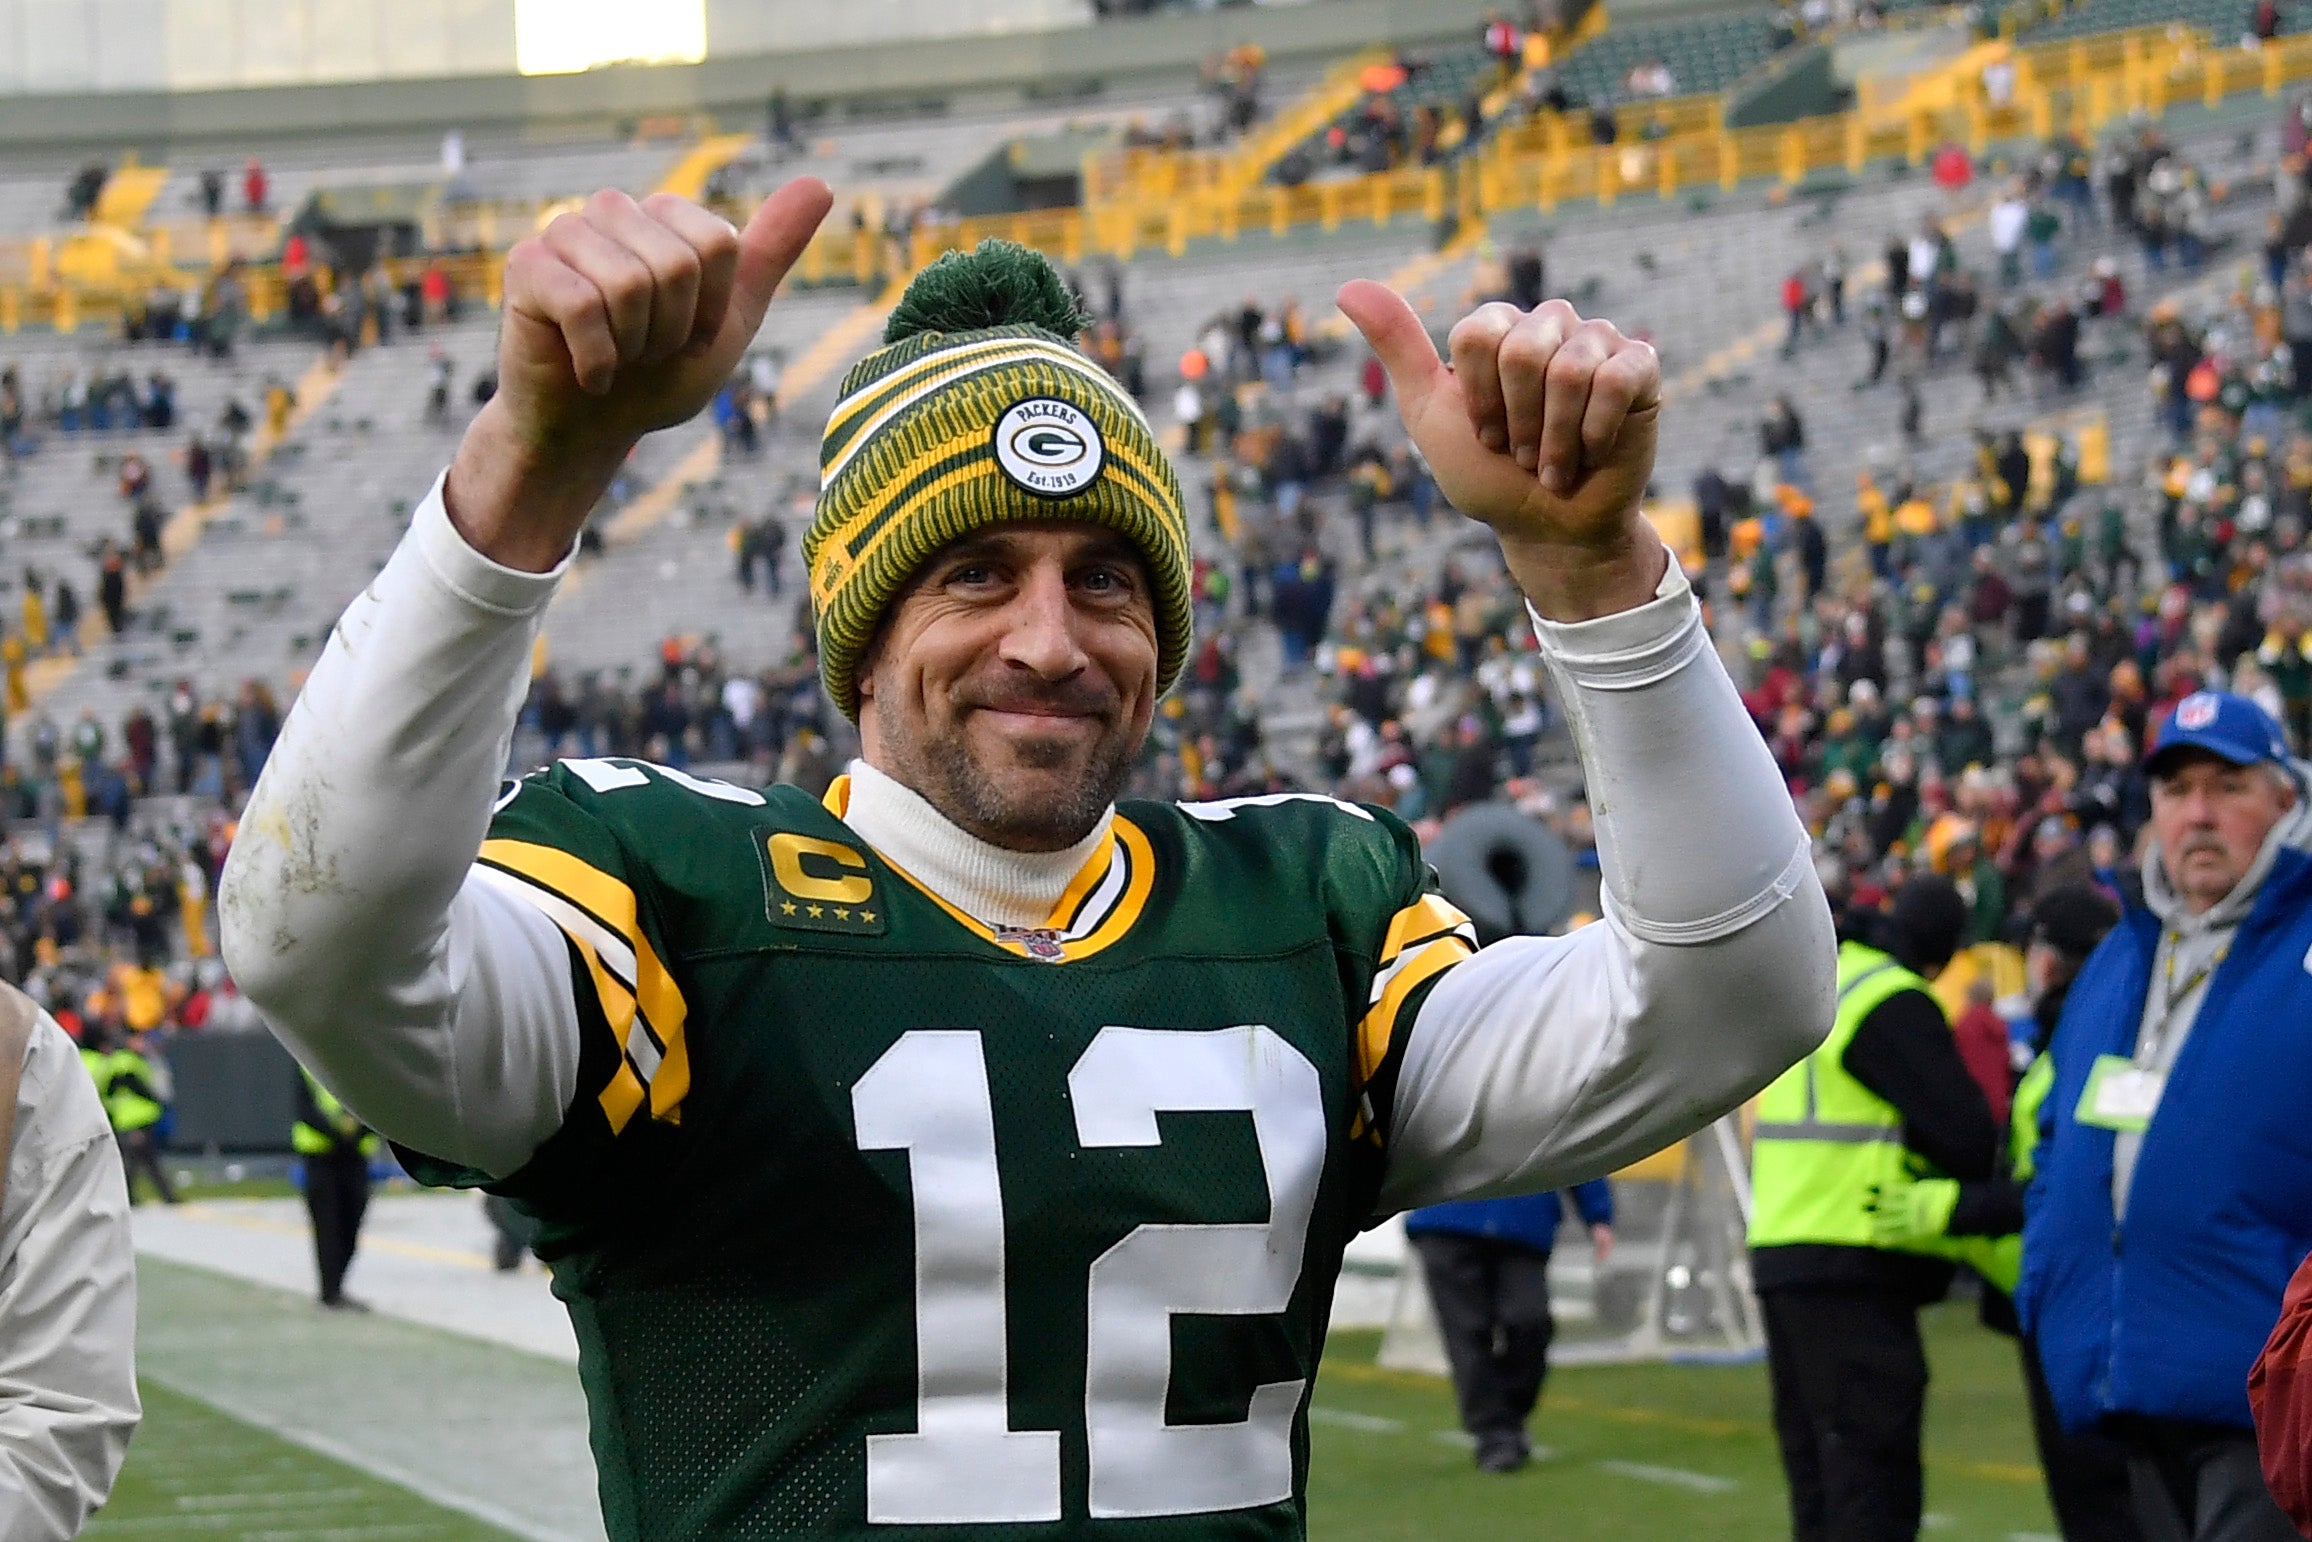 NFL star Aaron Rodgers pledged to receive part of his salary in Bitcoin